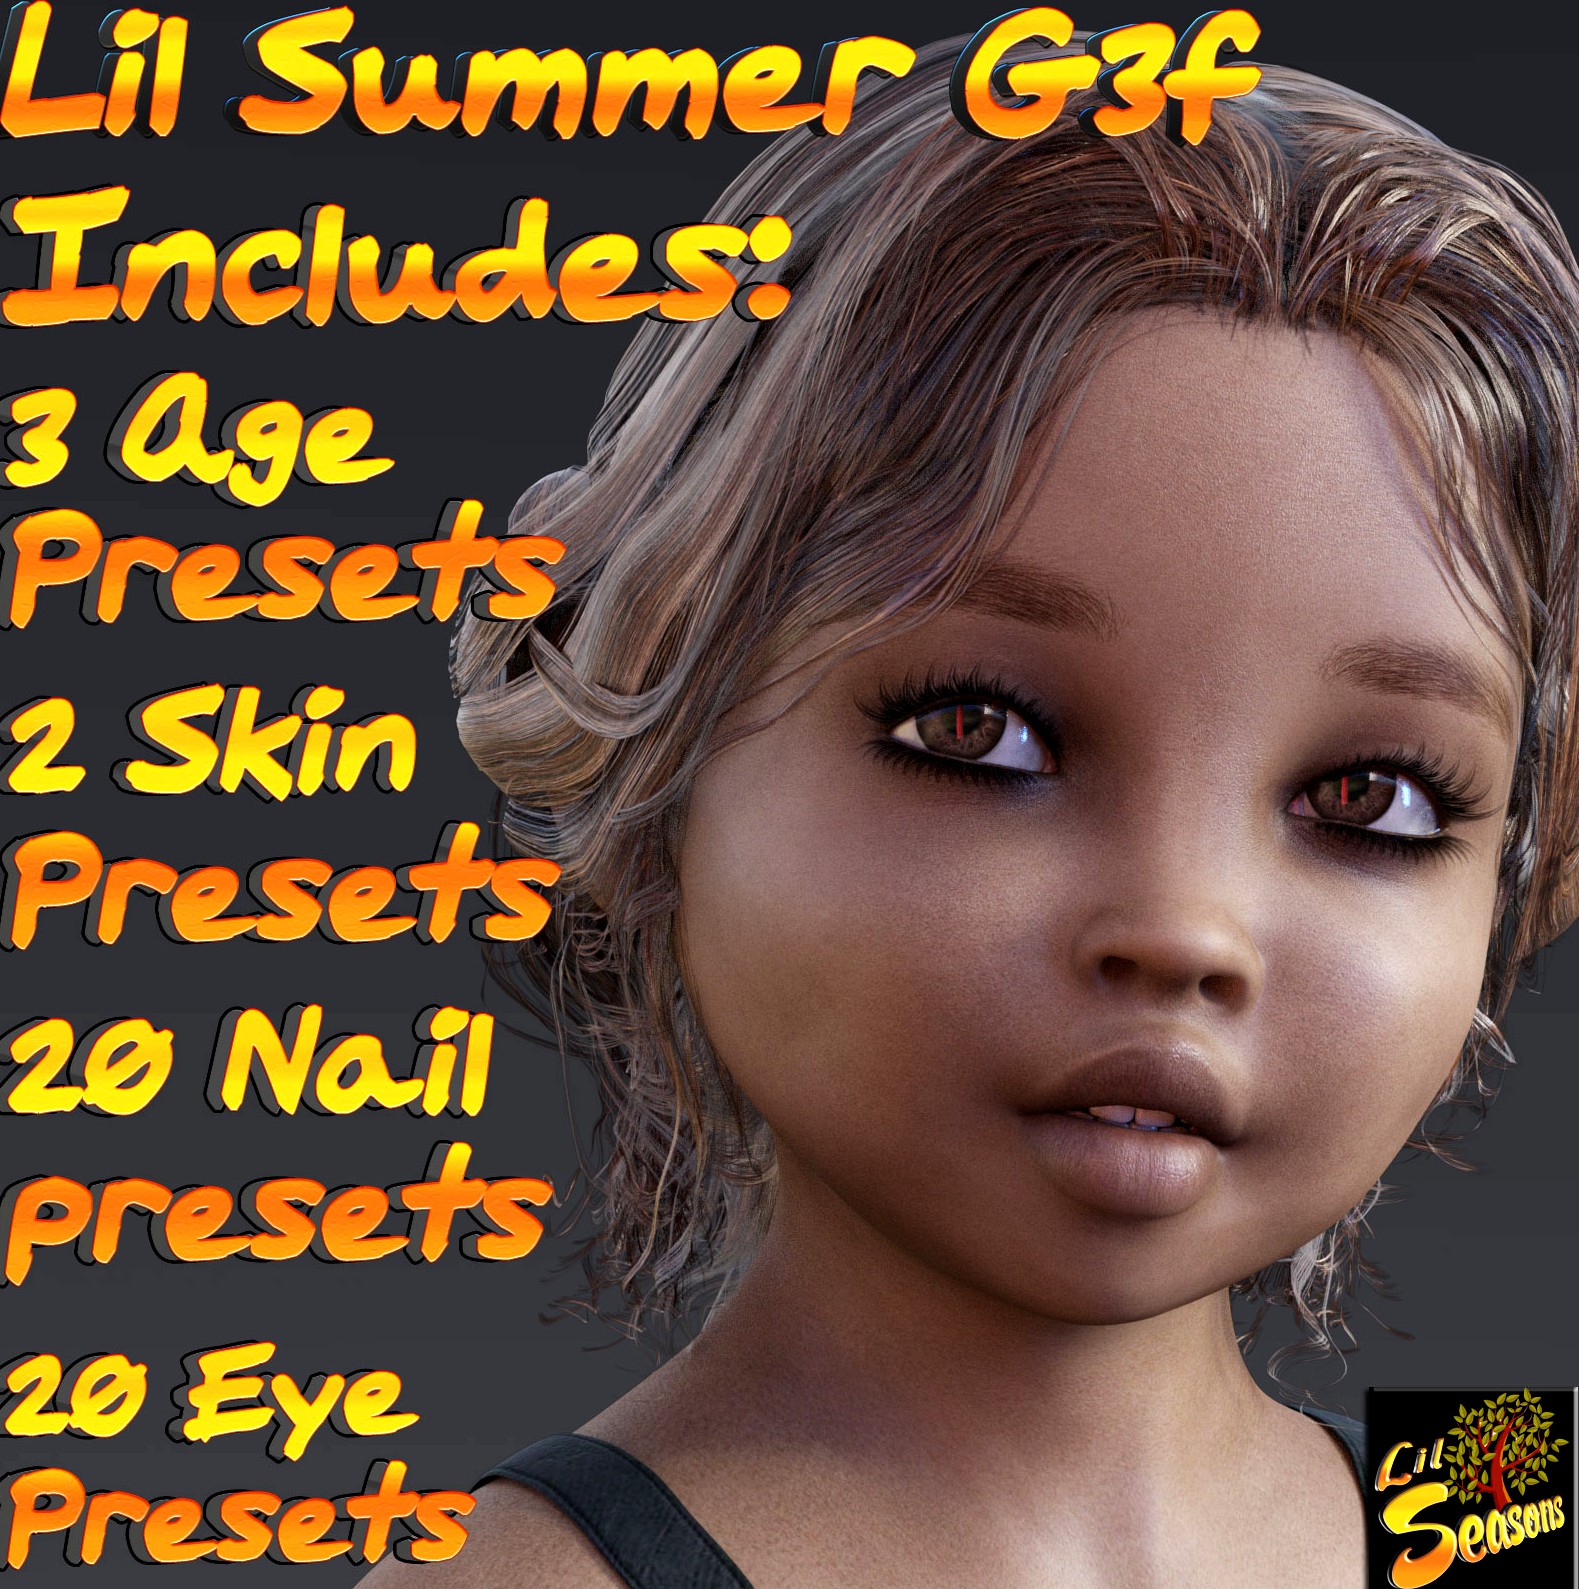 Lil Summer for G3F